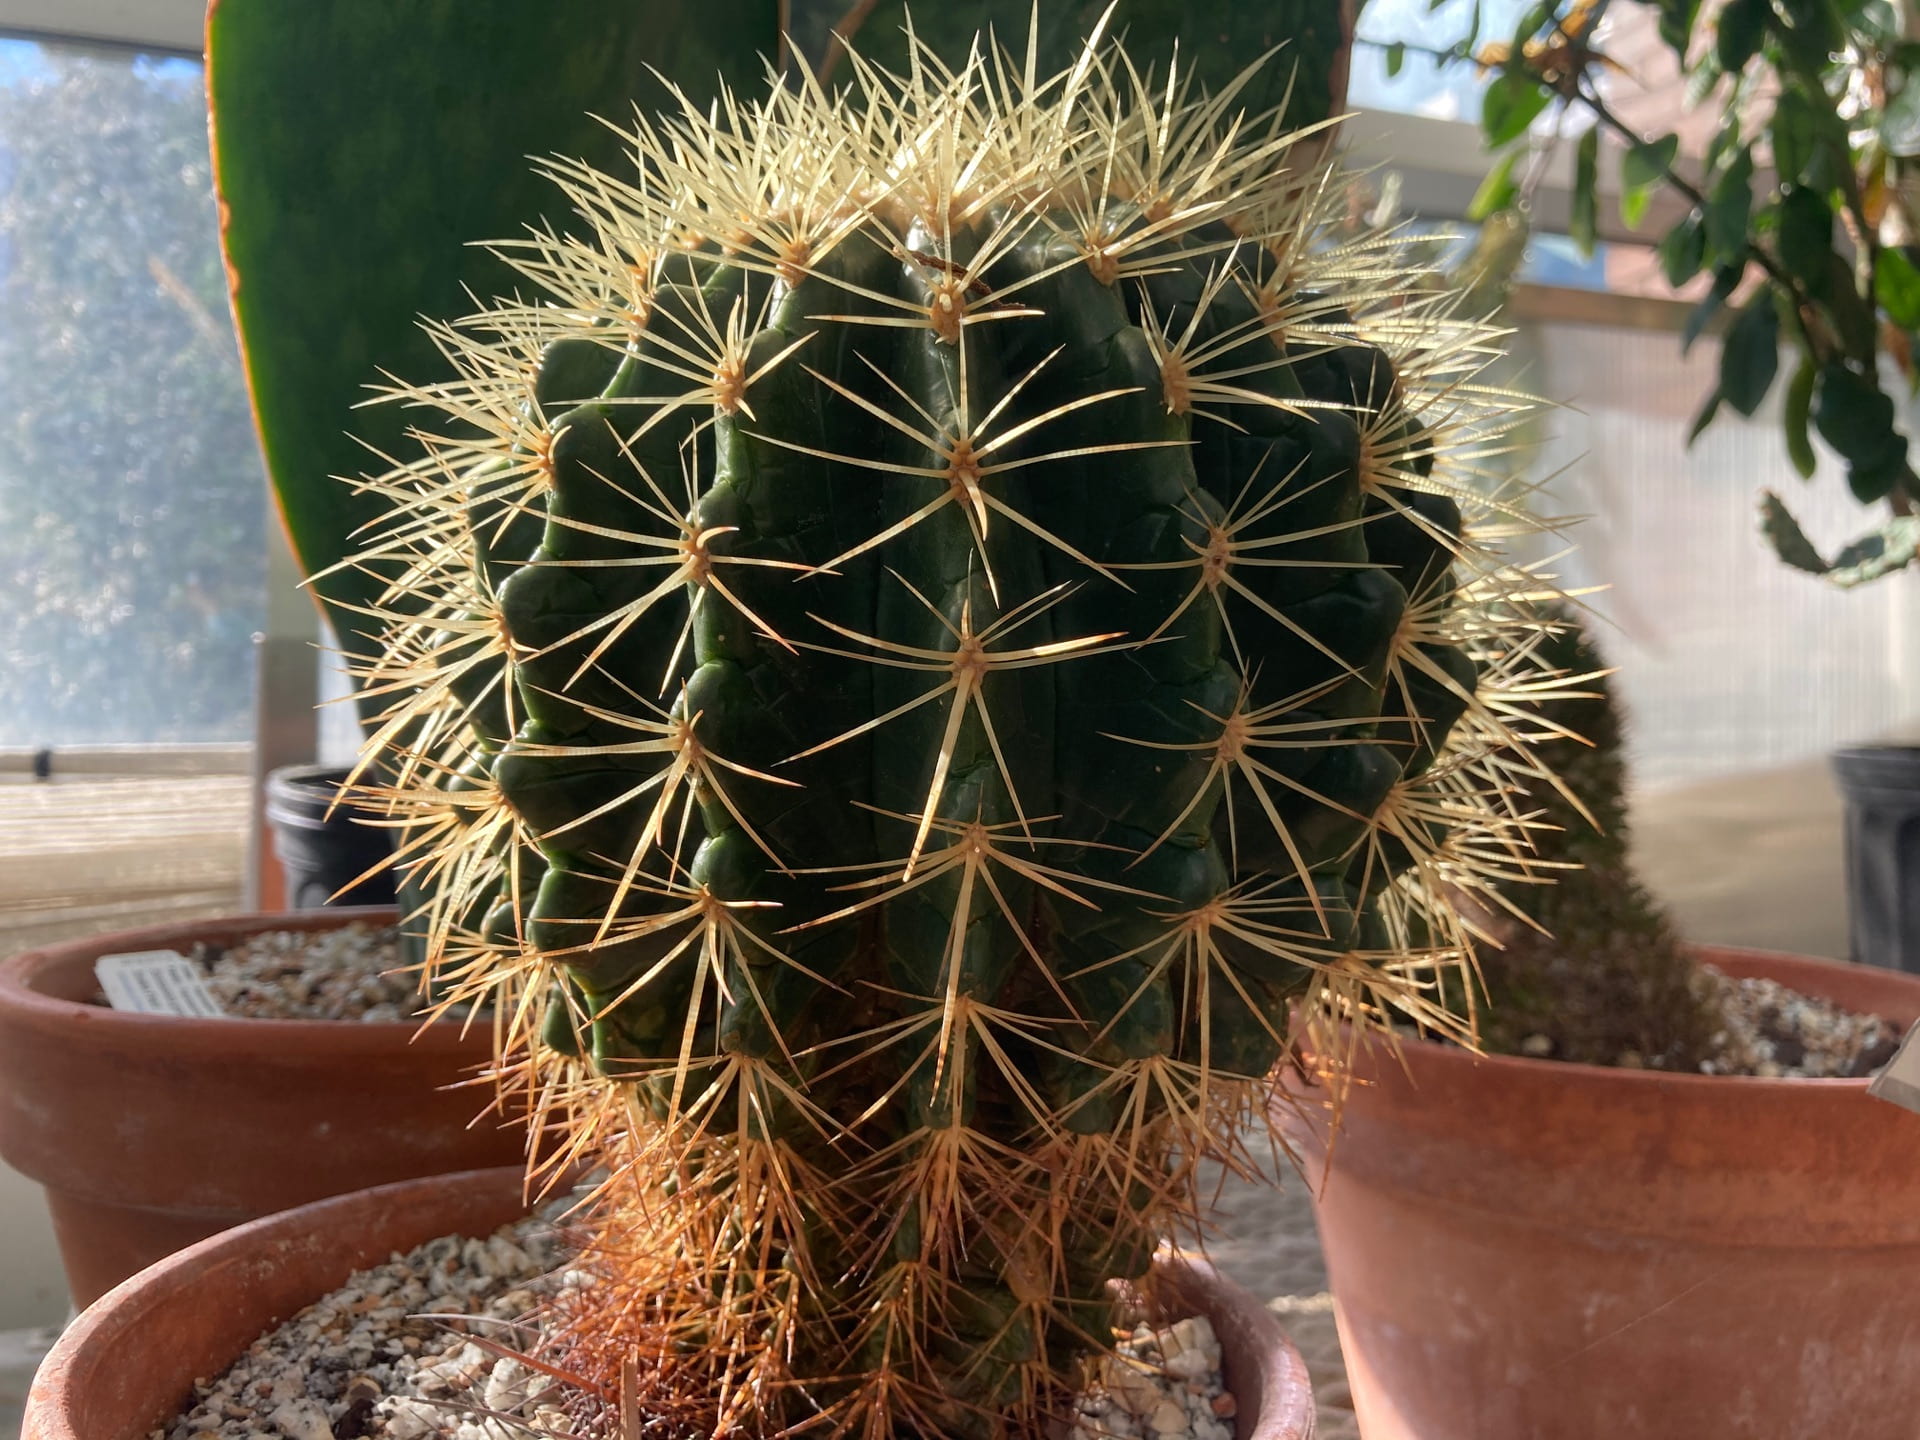 Many cacti and succulents have adapted to have fleshy leaves and stems as a way to store water.